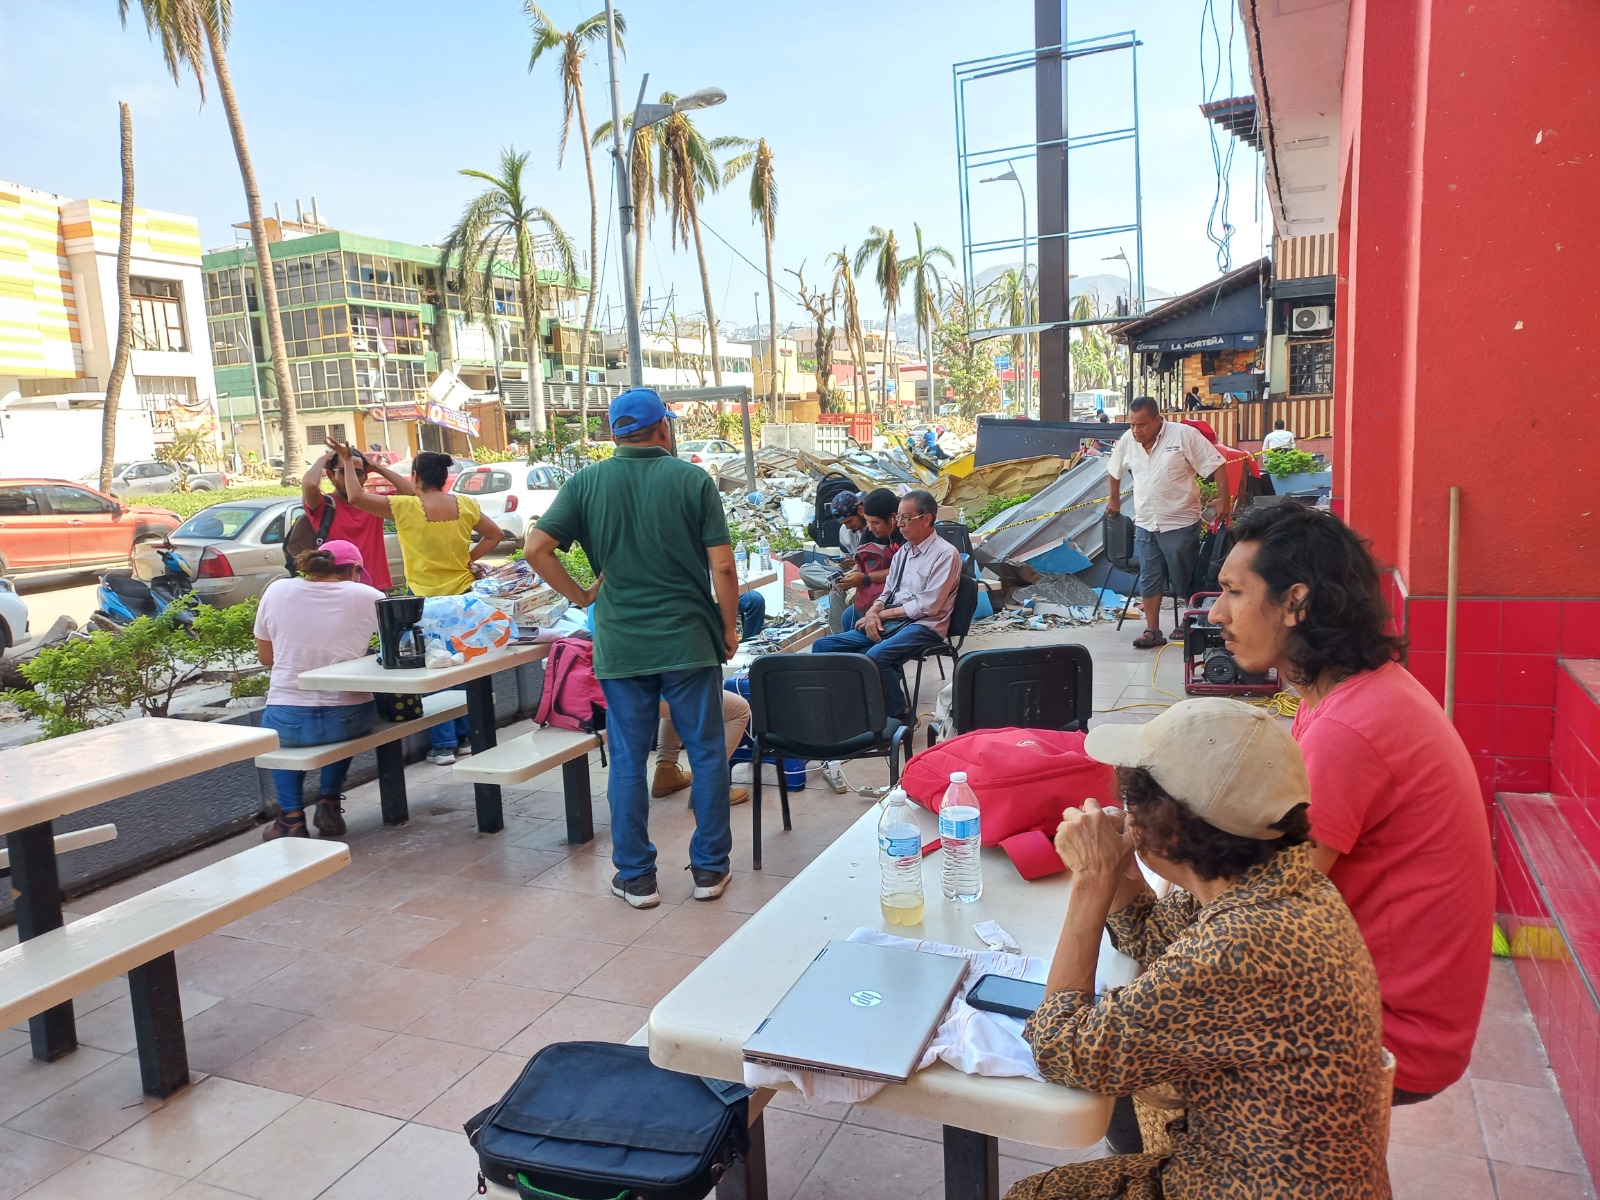 A group of journalists gathered at the outdoors area of a restaurant in Acapulco.